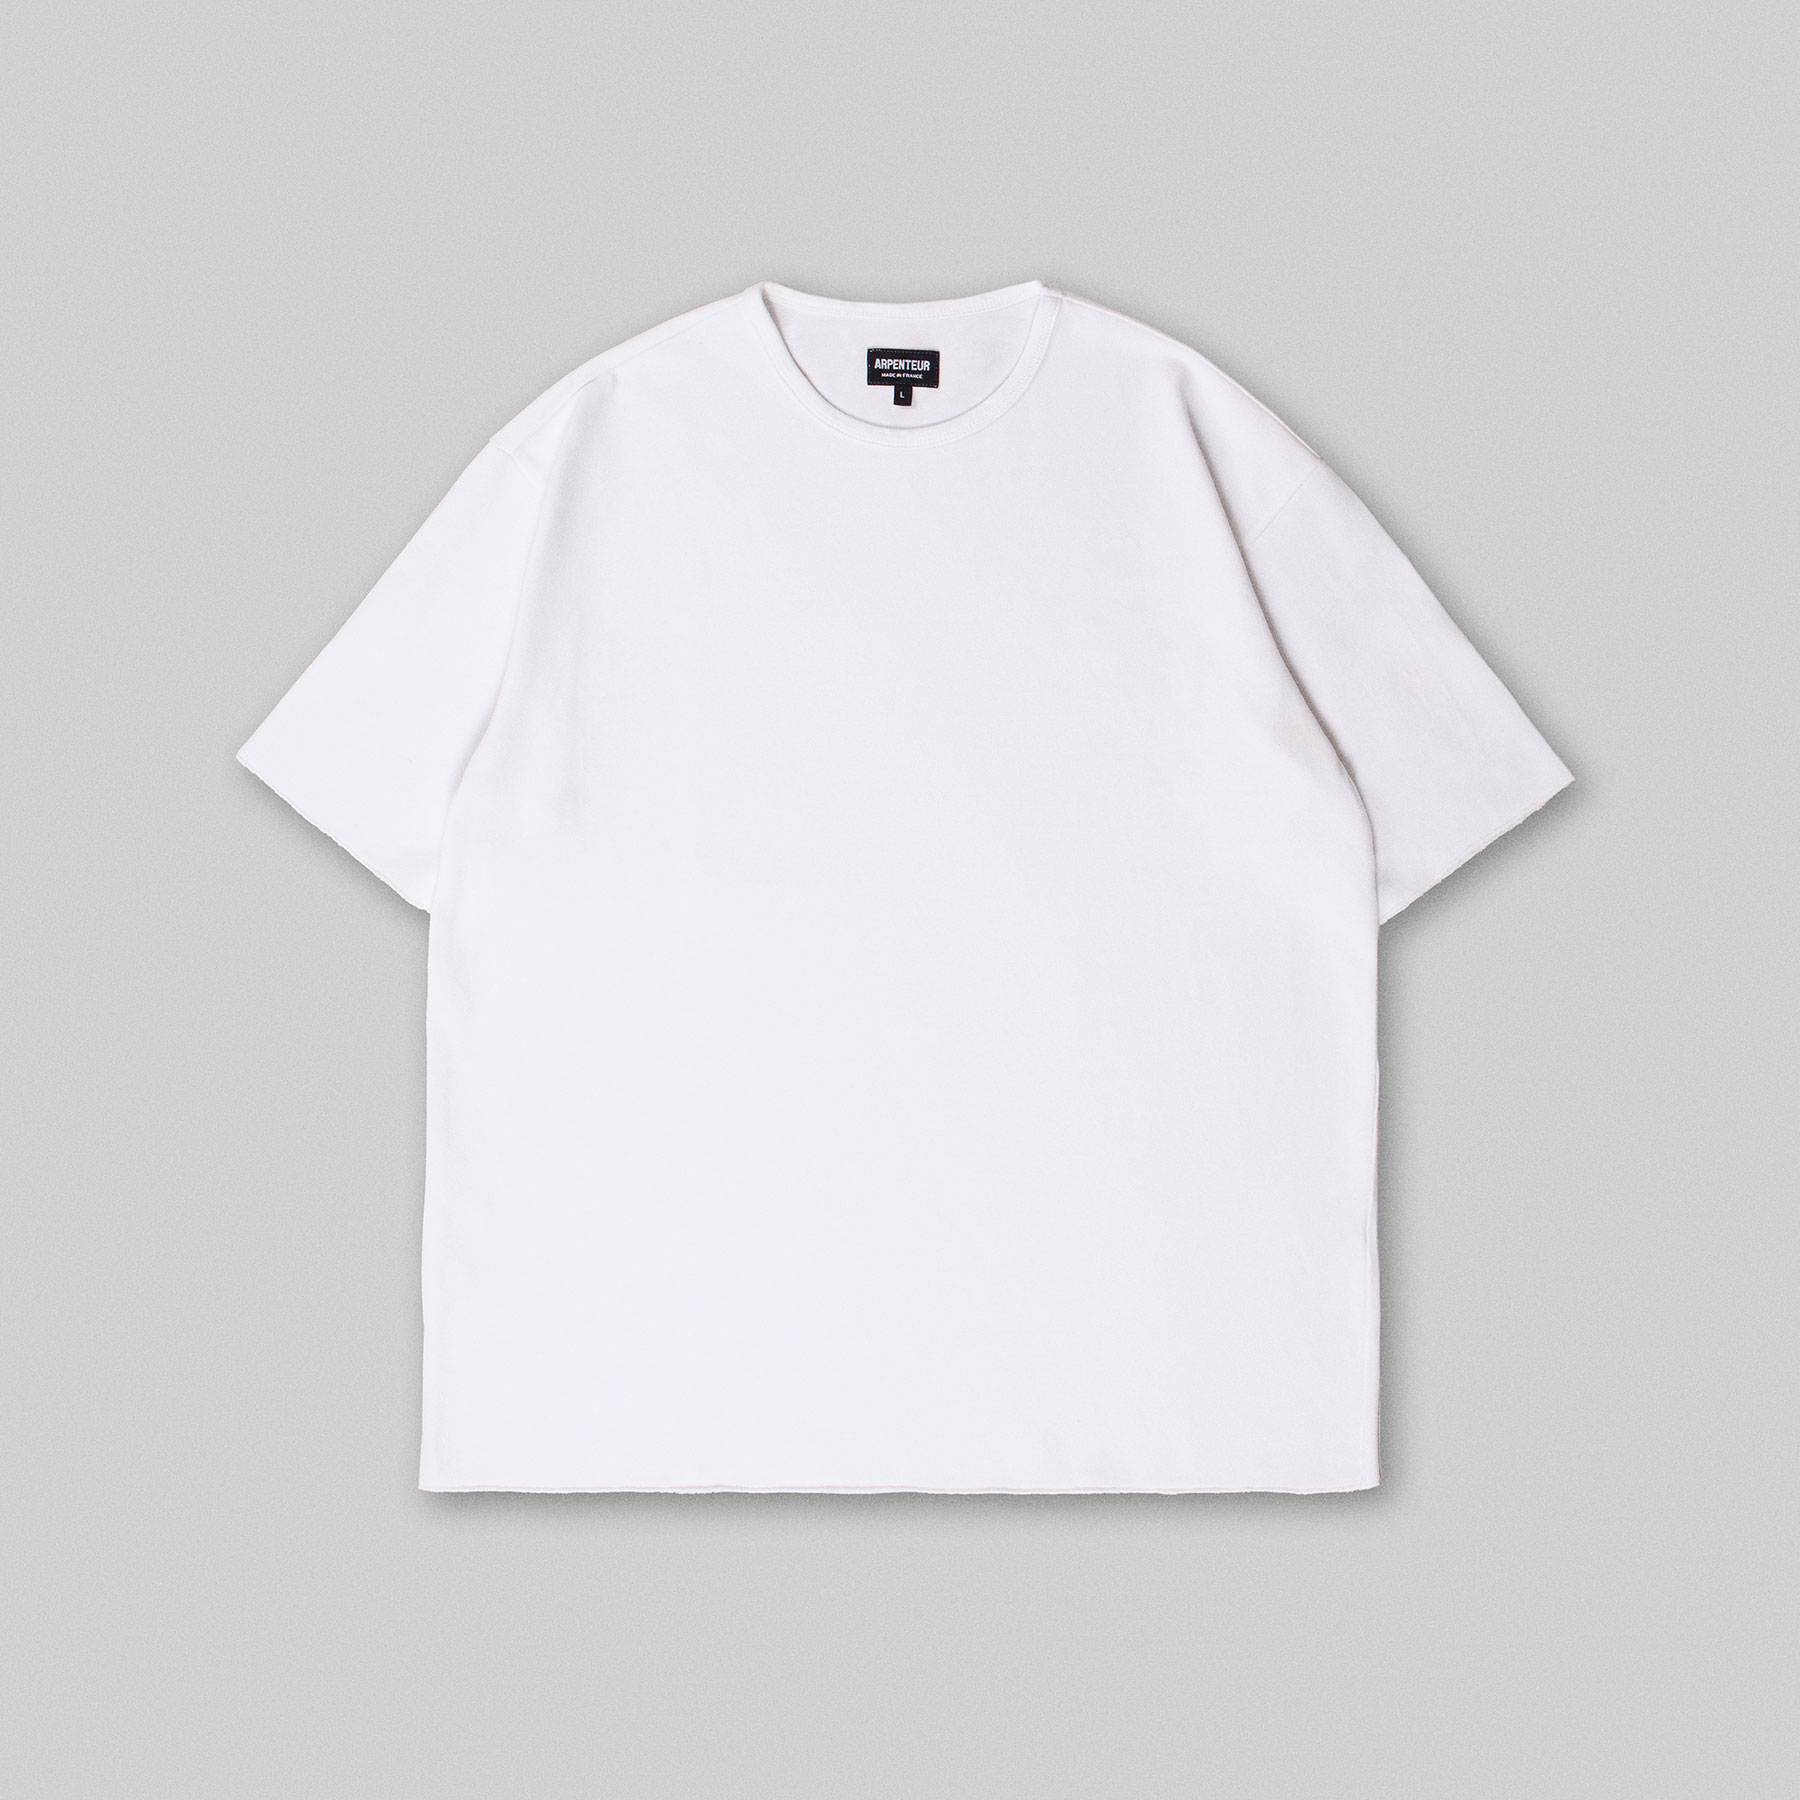 PONTUS t-shirt by Arpenteur in White color